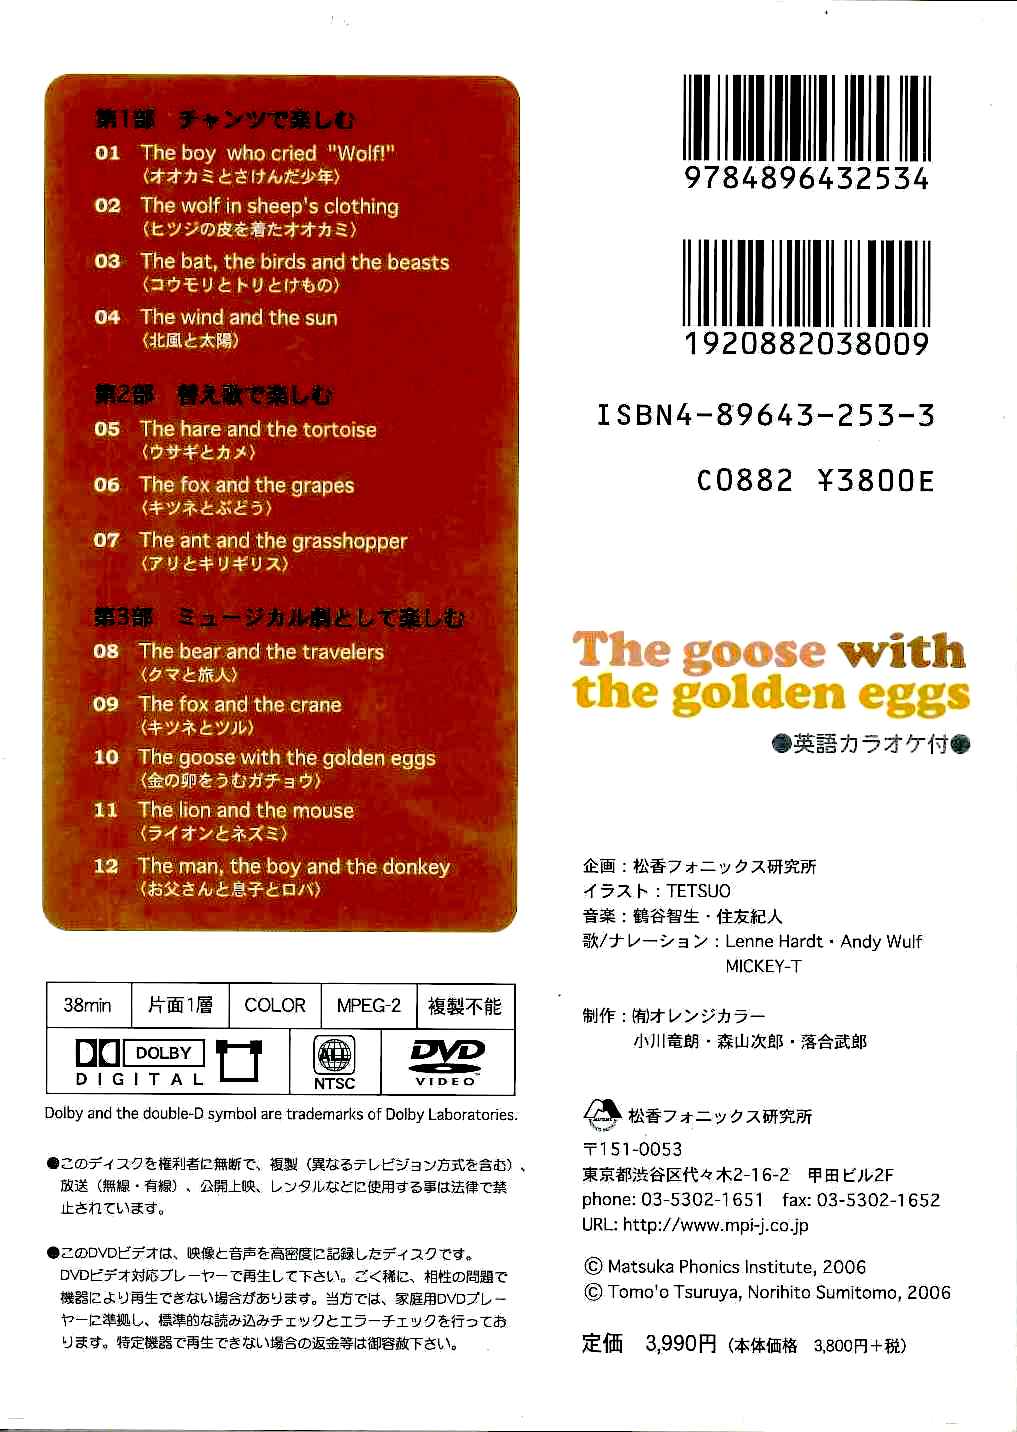 The goose with the golden eggs DVD